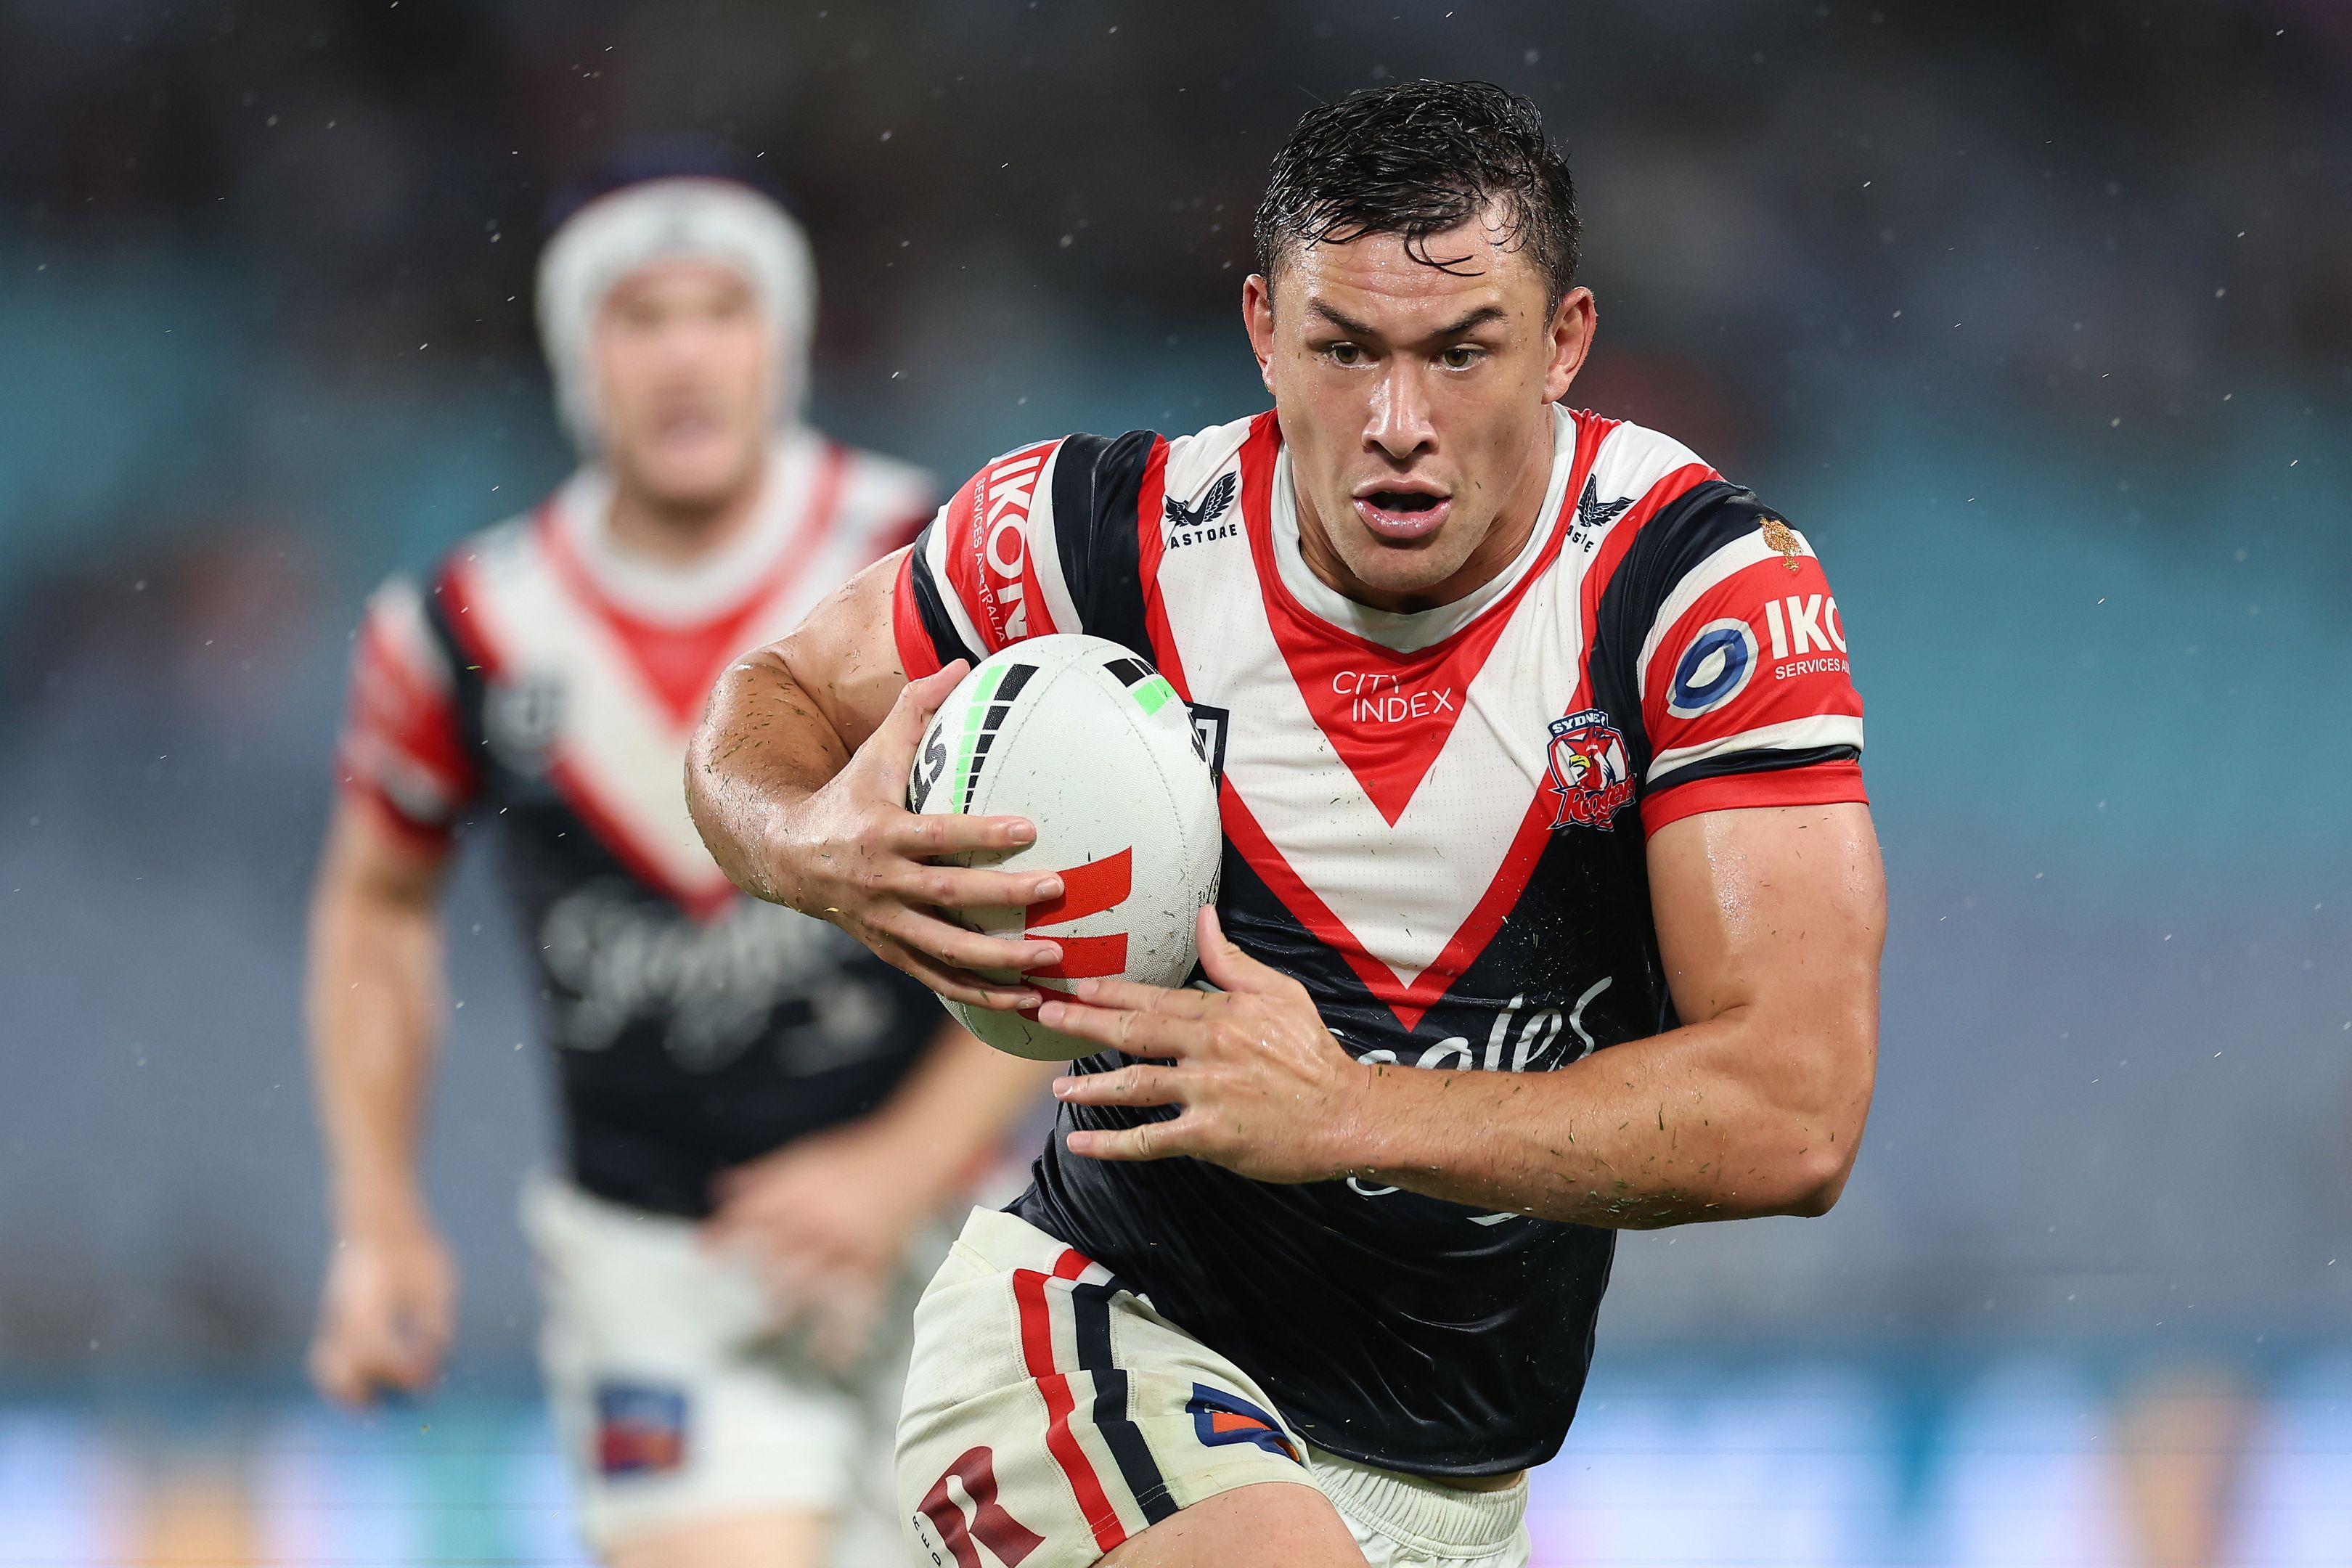 Joey Manu responds after suggestions he'll return to the Roosters after completion of Japanese Rugby deal